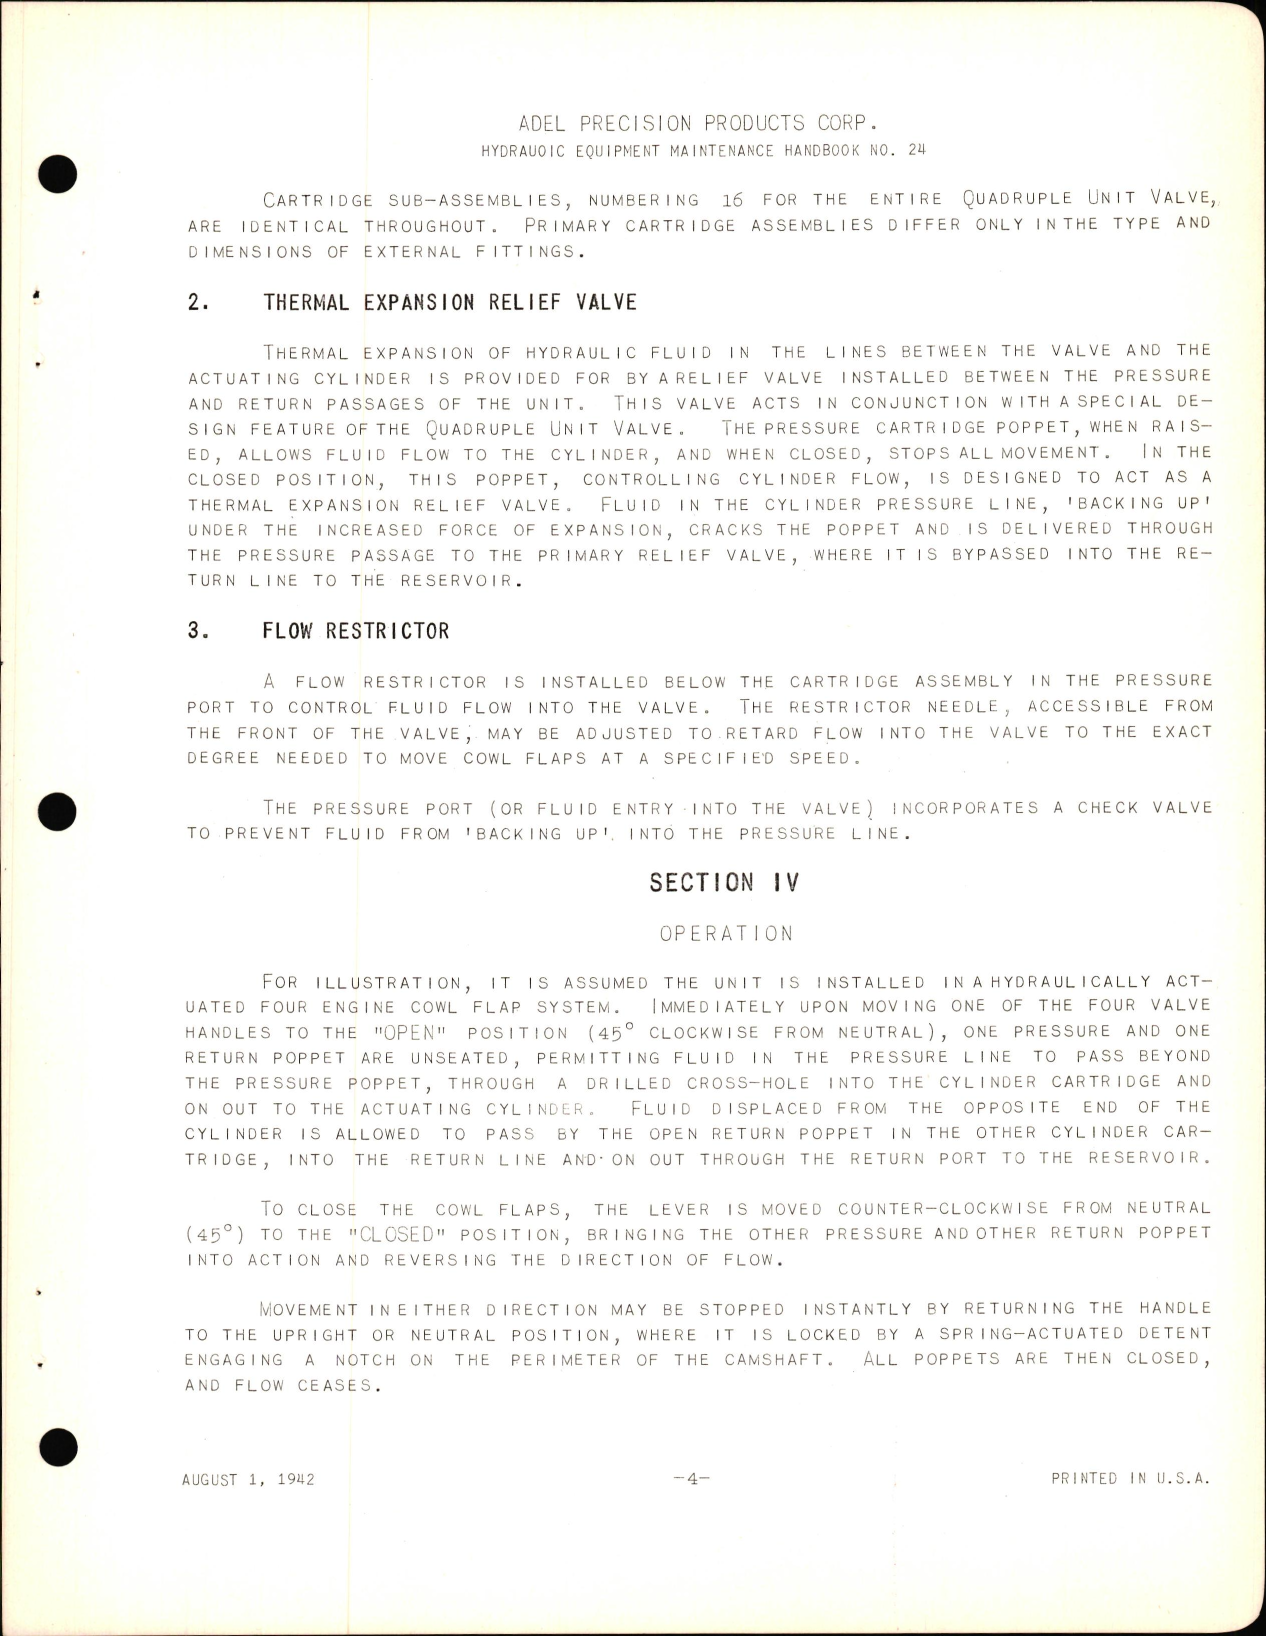 Sample page 9 from AirCorps Library document: Instructions with Parts Catalog for Quadruple Cowl Flap Selector Valve G10340 